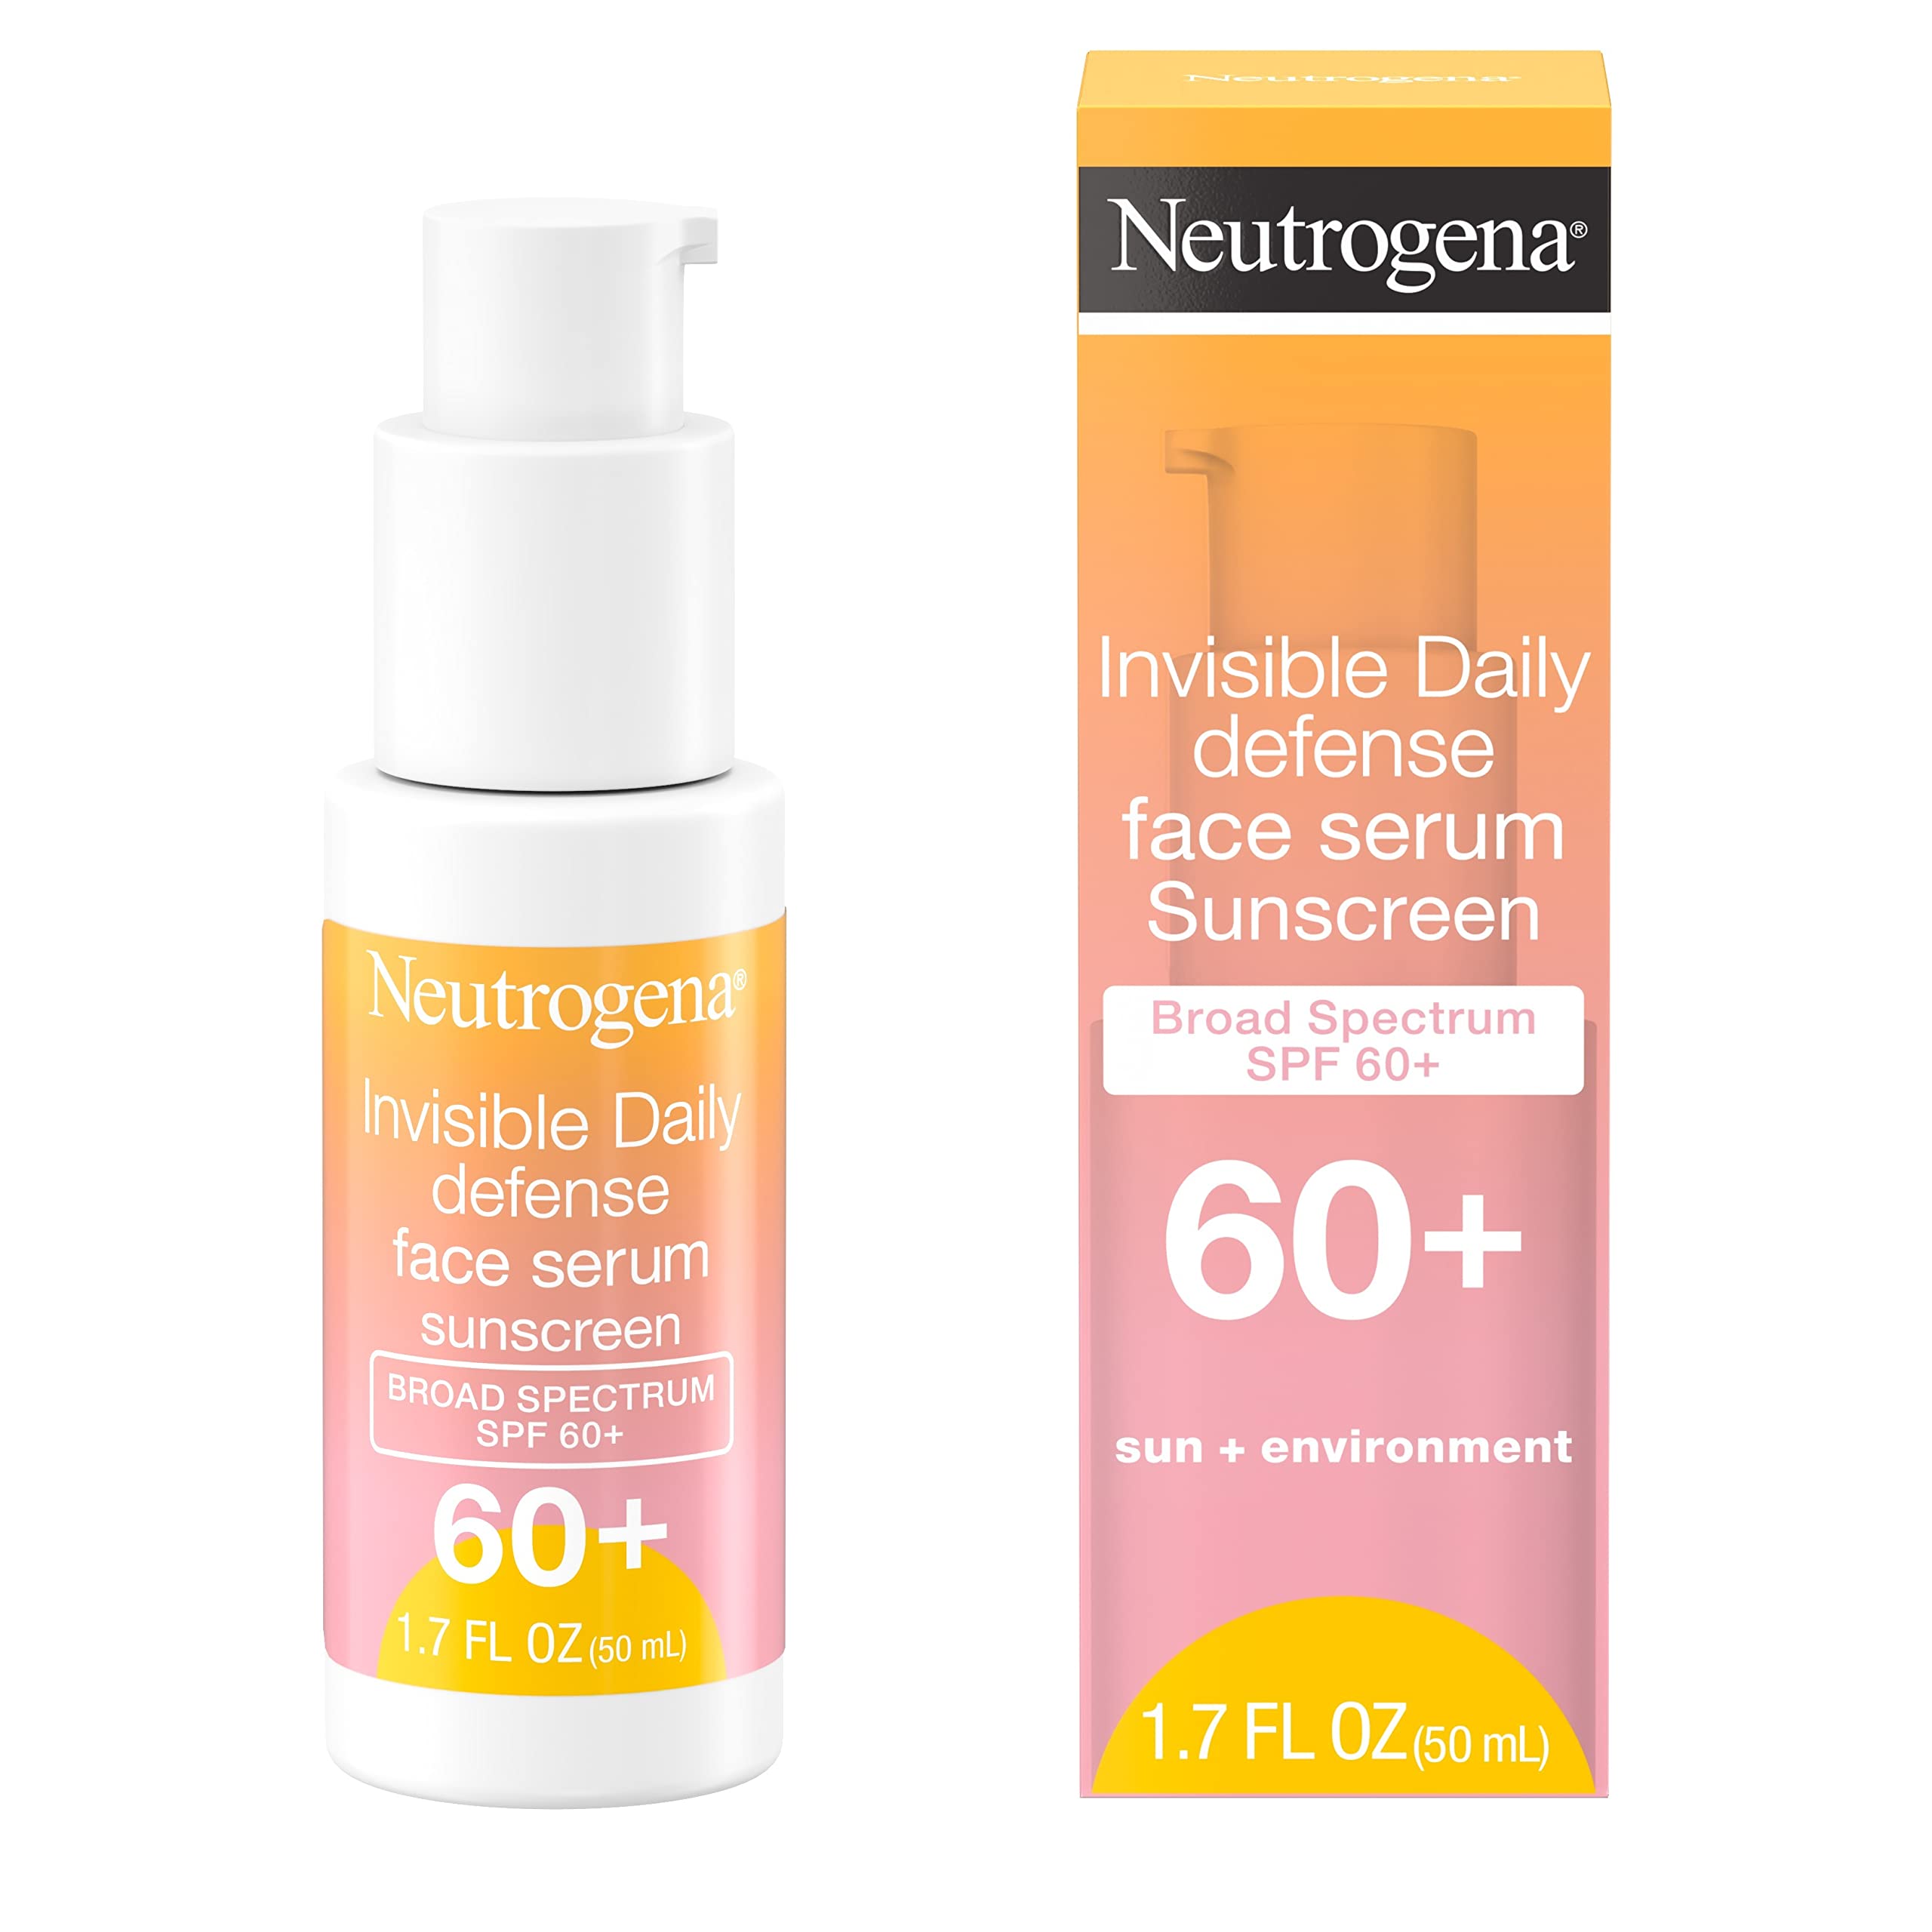 Neutrogena Invisible Daily Defense Face Sunscreen + Hydrating Serum with Broad Spectrum SPF 60+ & Antioxidants to Help Skin Glow, Oil-Free, Fragrance Free, 1.7 fl. oz